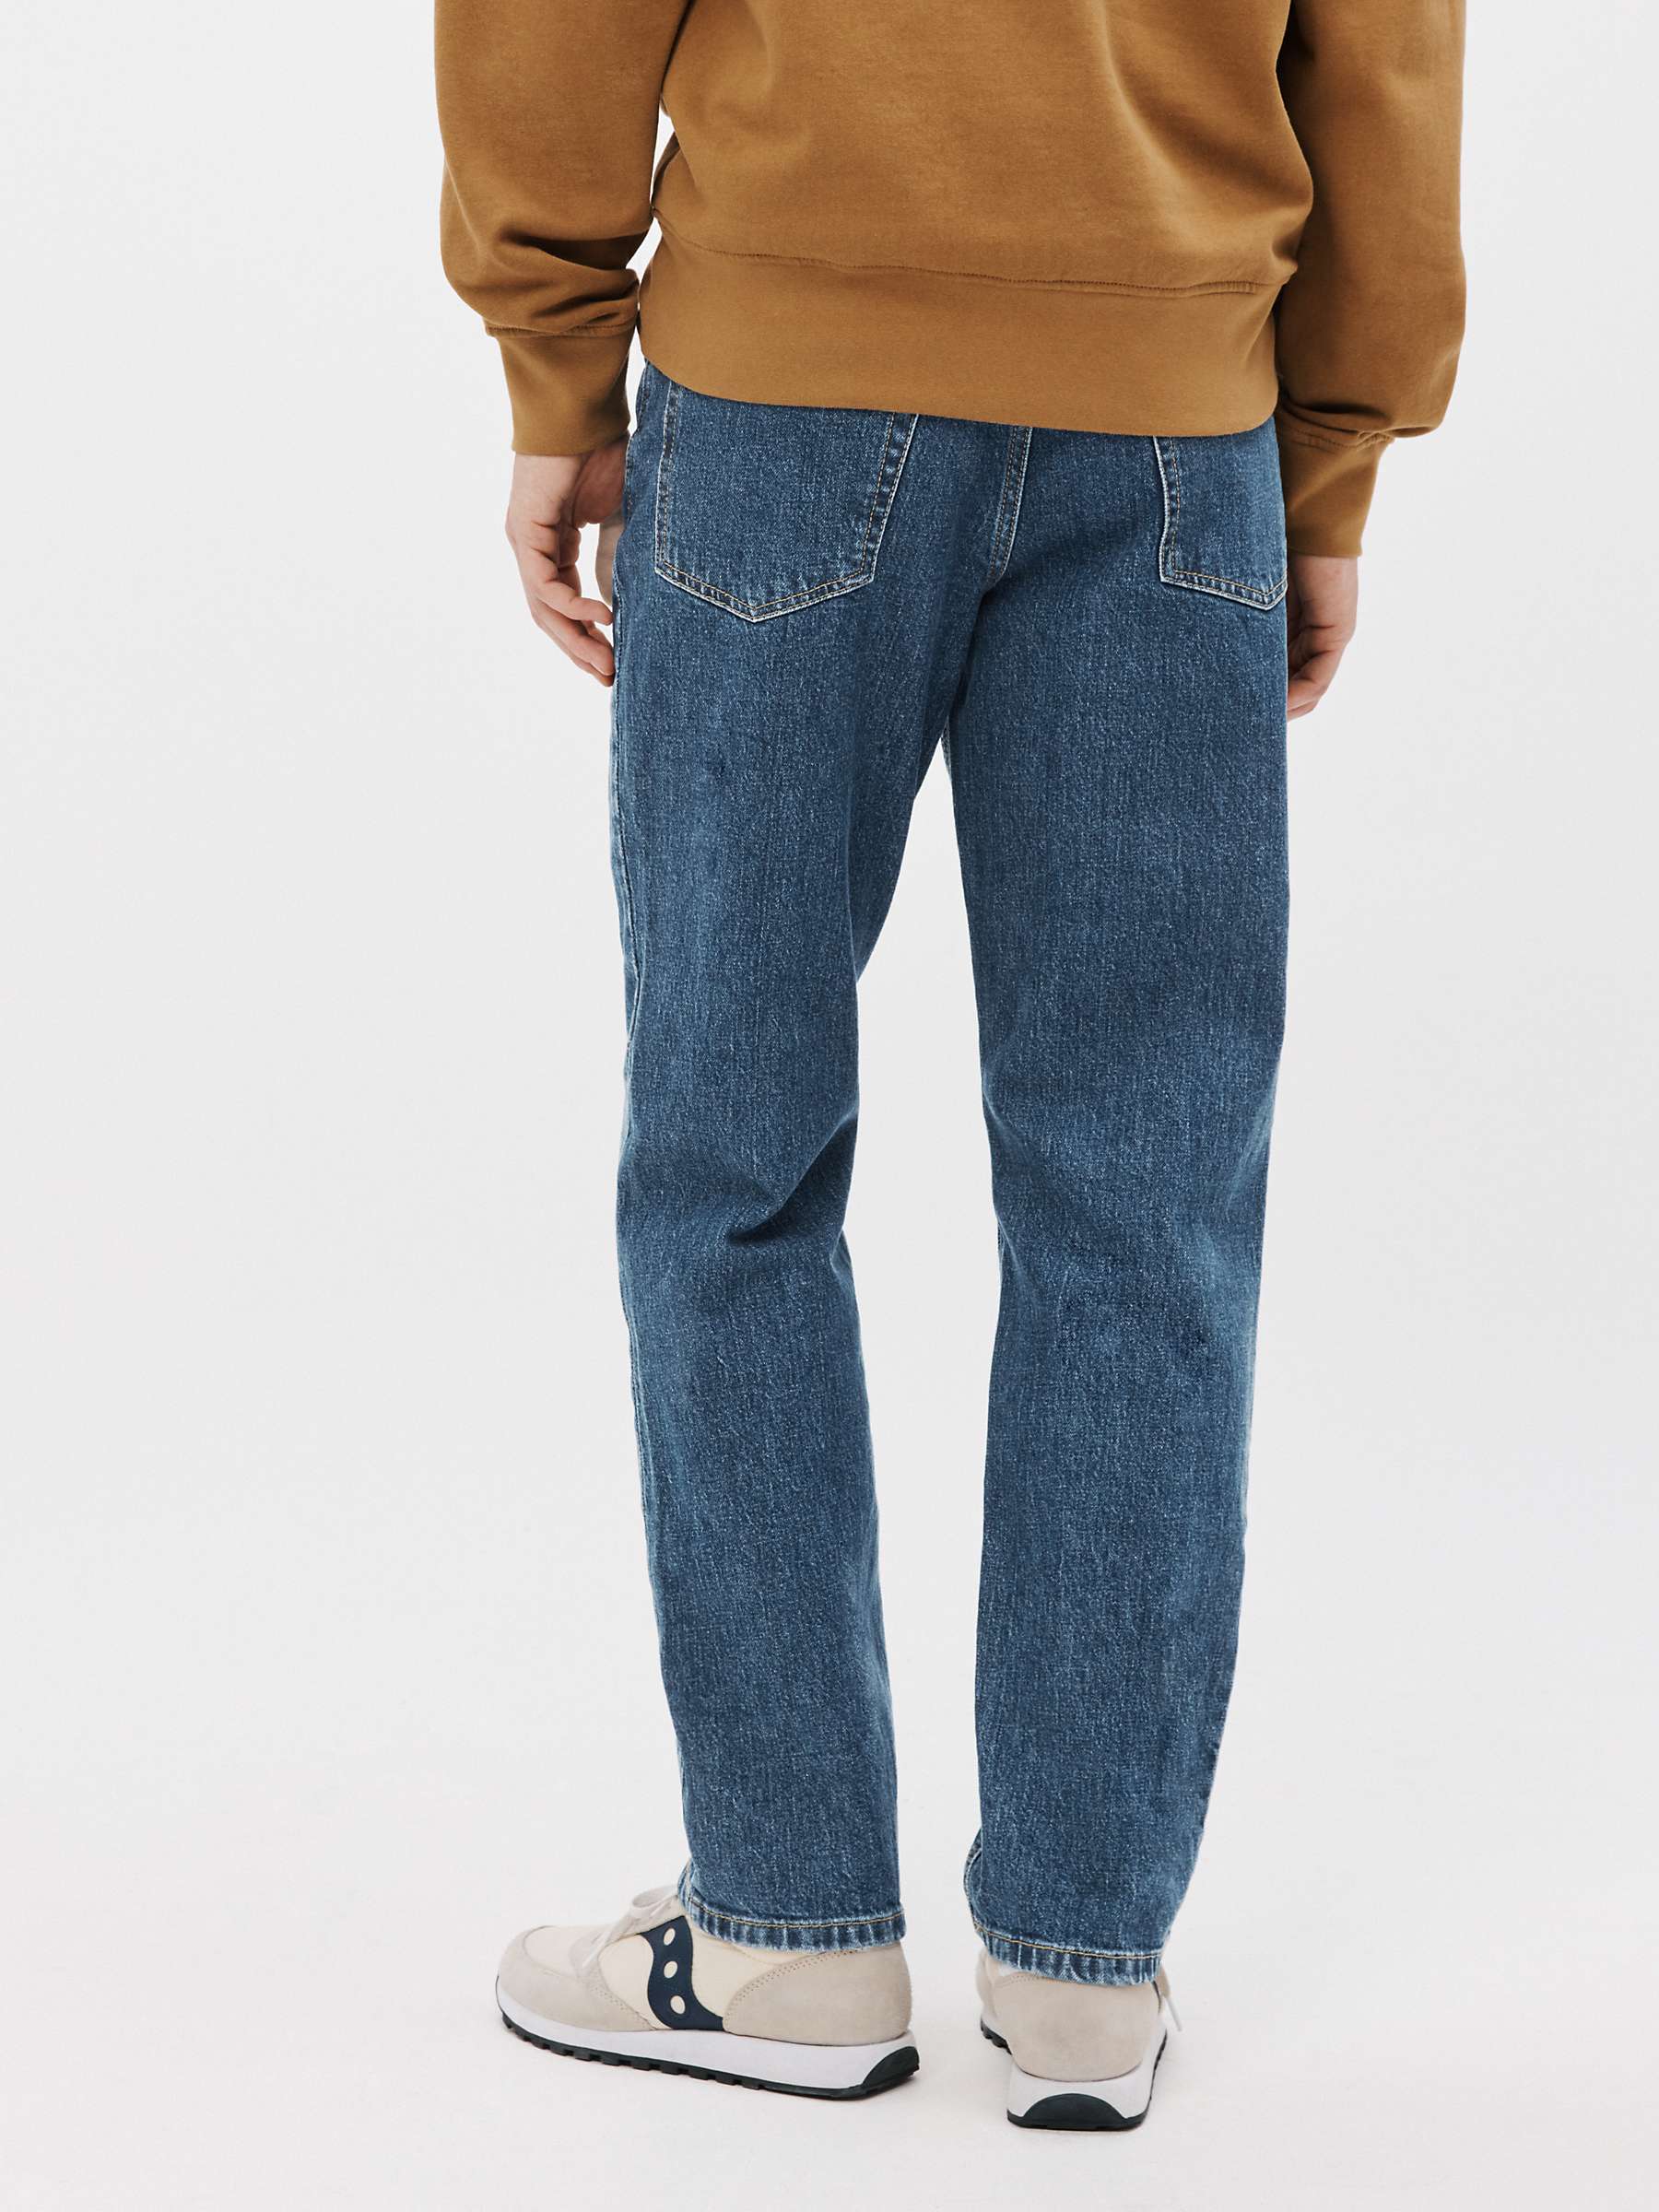 Buy John Lewis ANYDAY Straight Fit Denim Jeans, Mid Wash Online at johnlewis.com